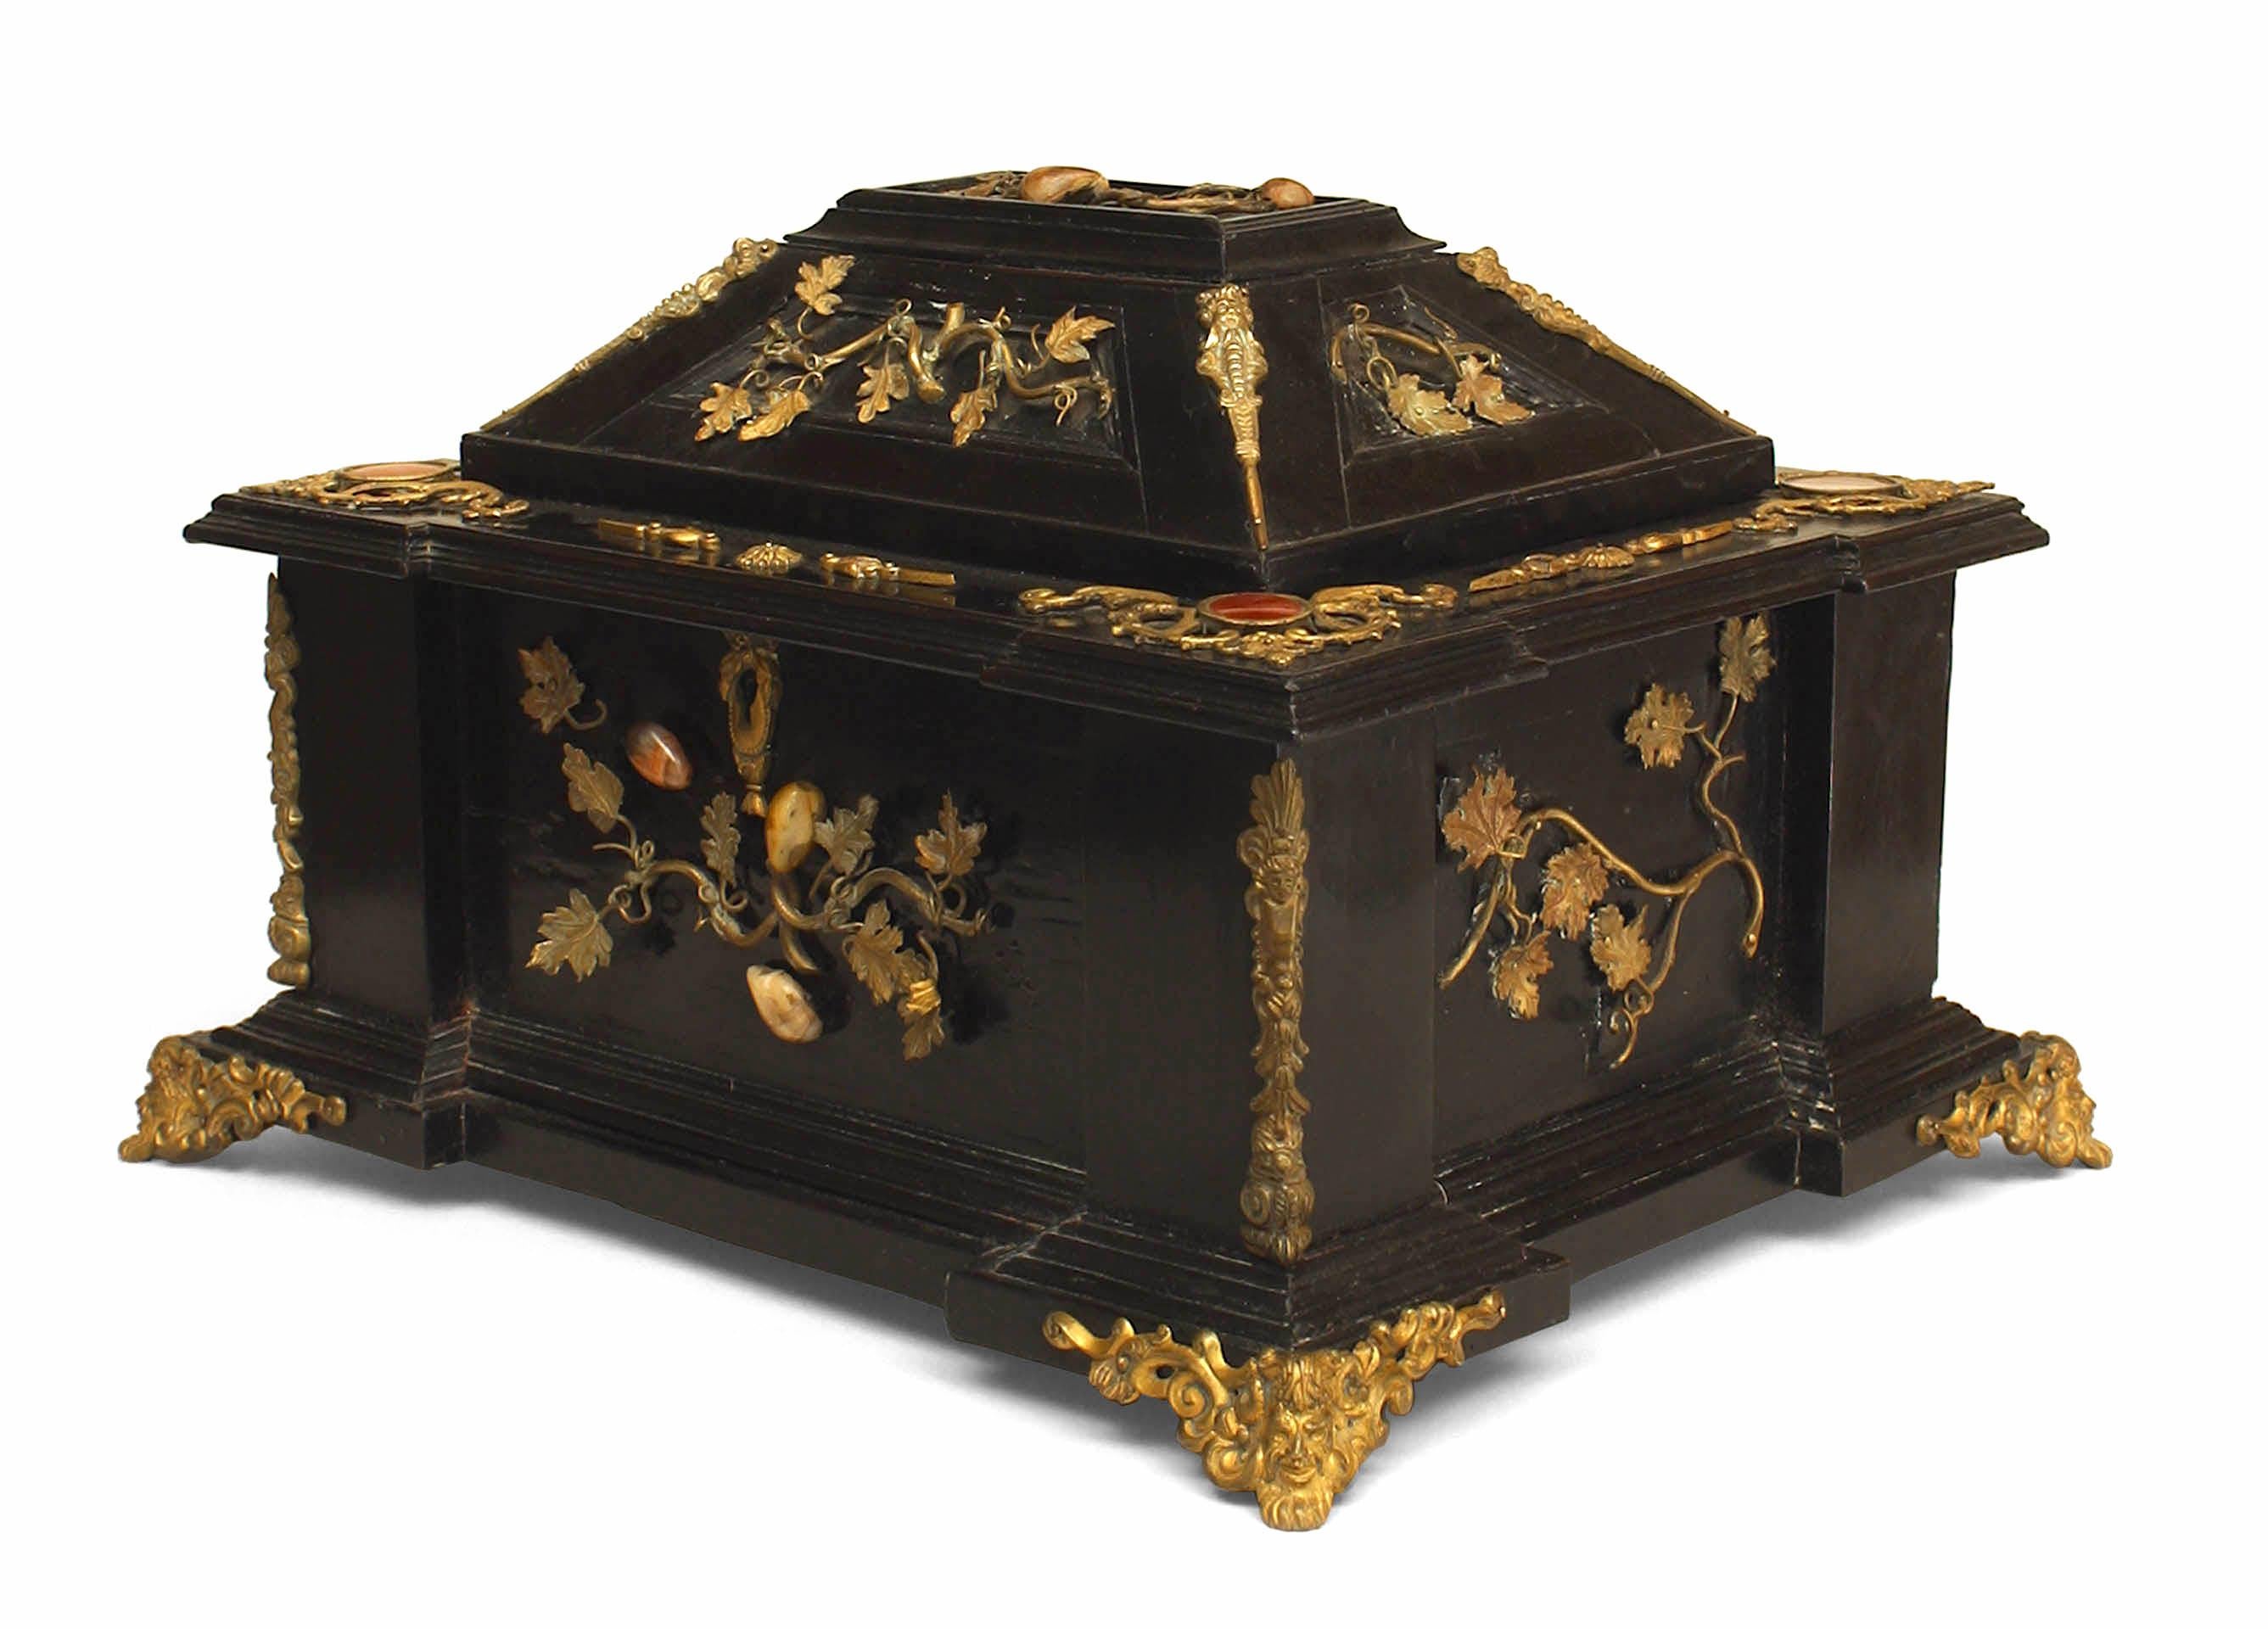 Italian Renaissance-style (19th Century) large black lacquered box with semi precious stones and bronze floral trim
